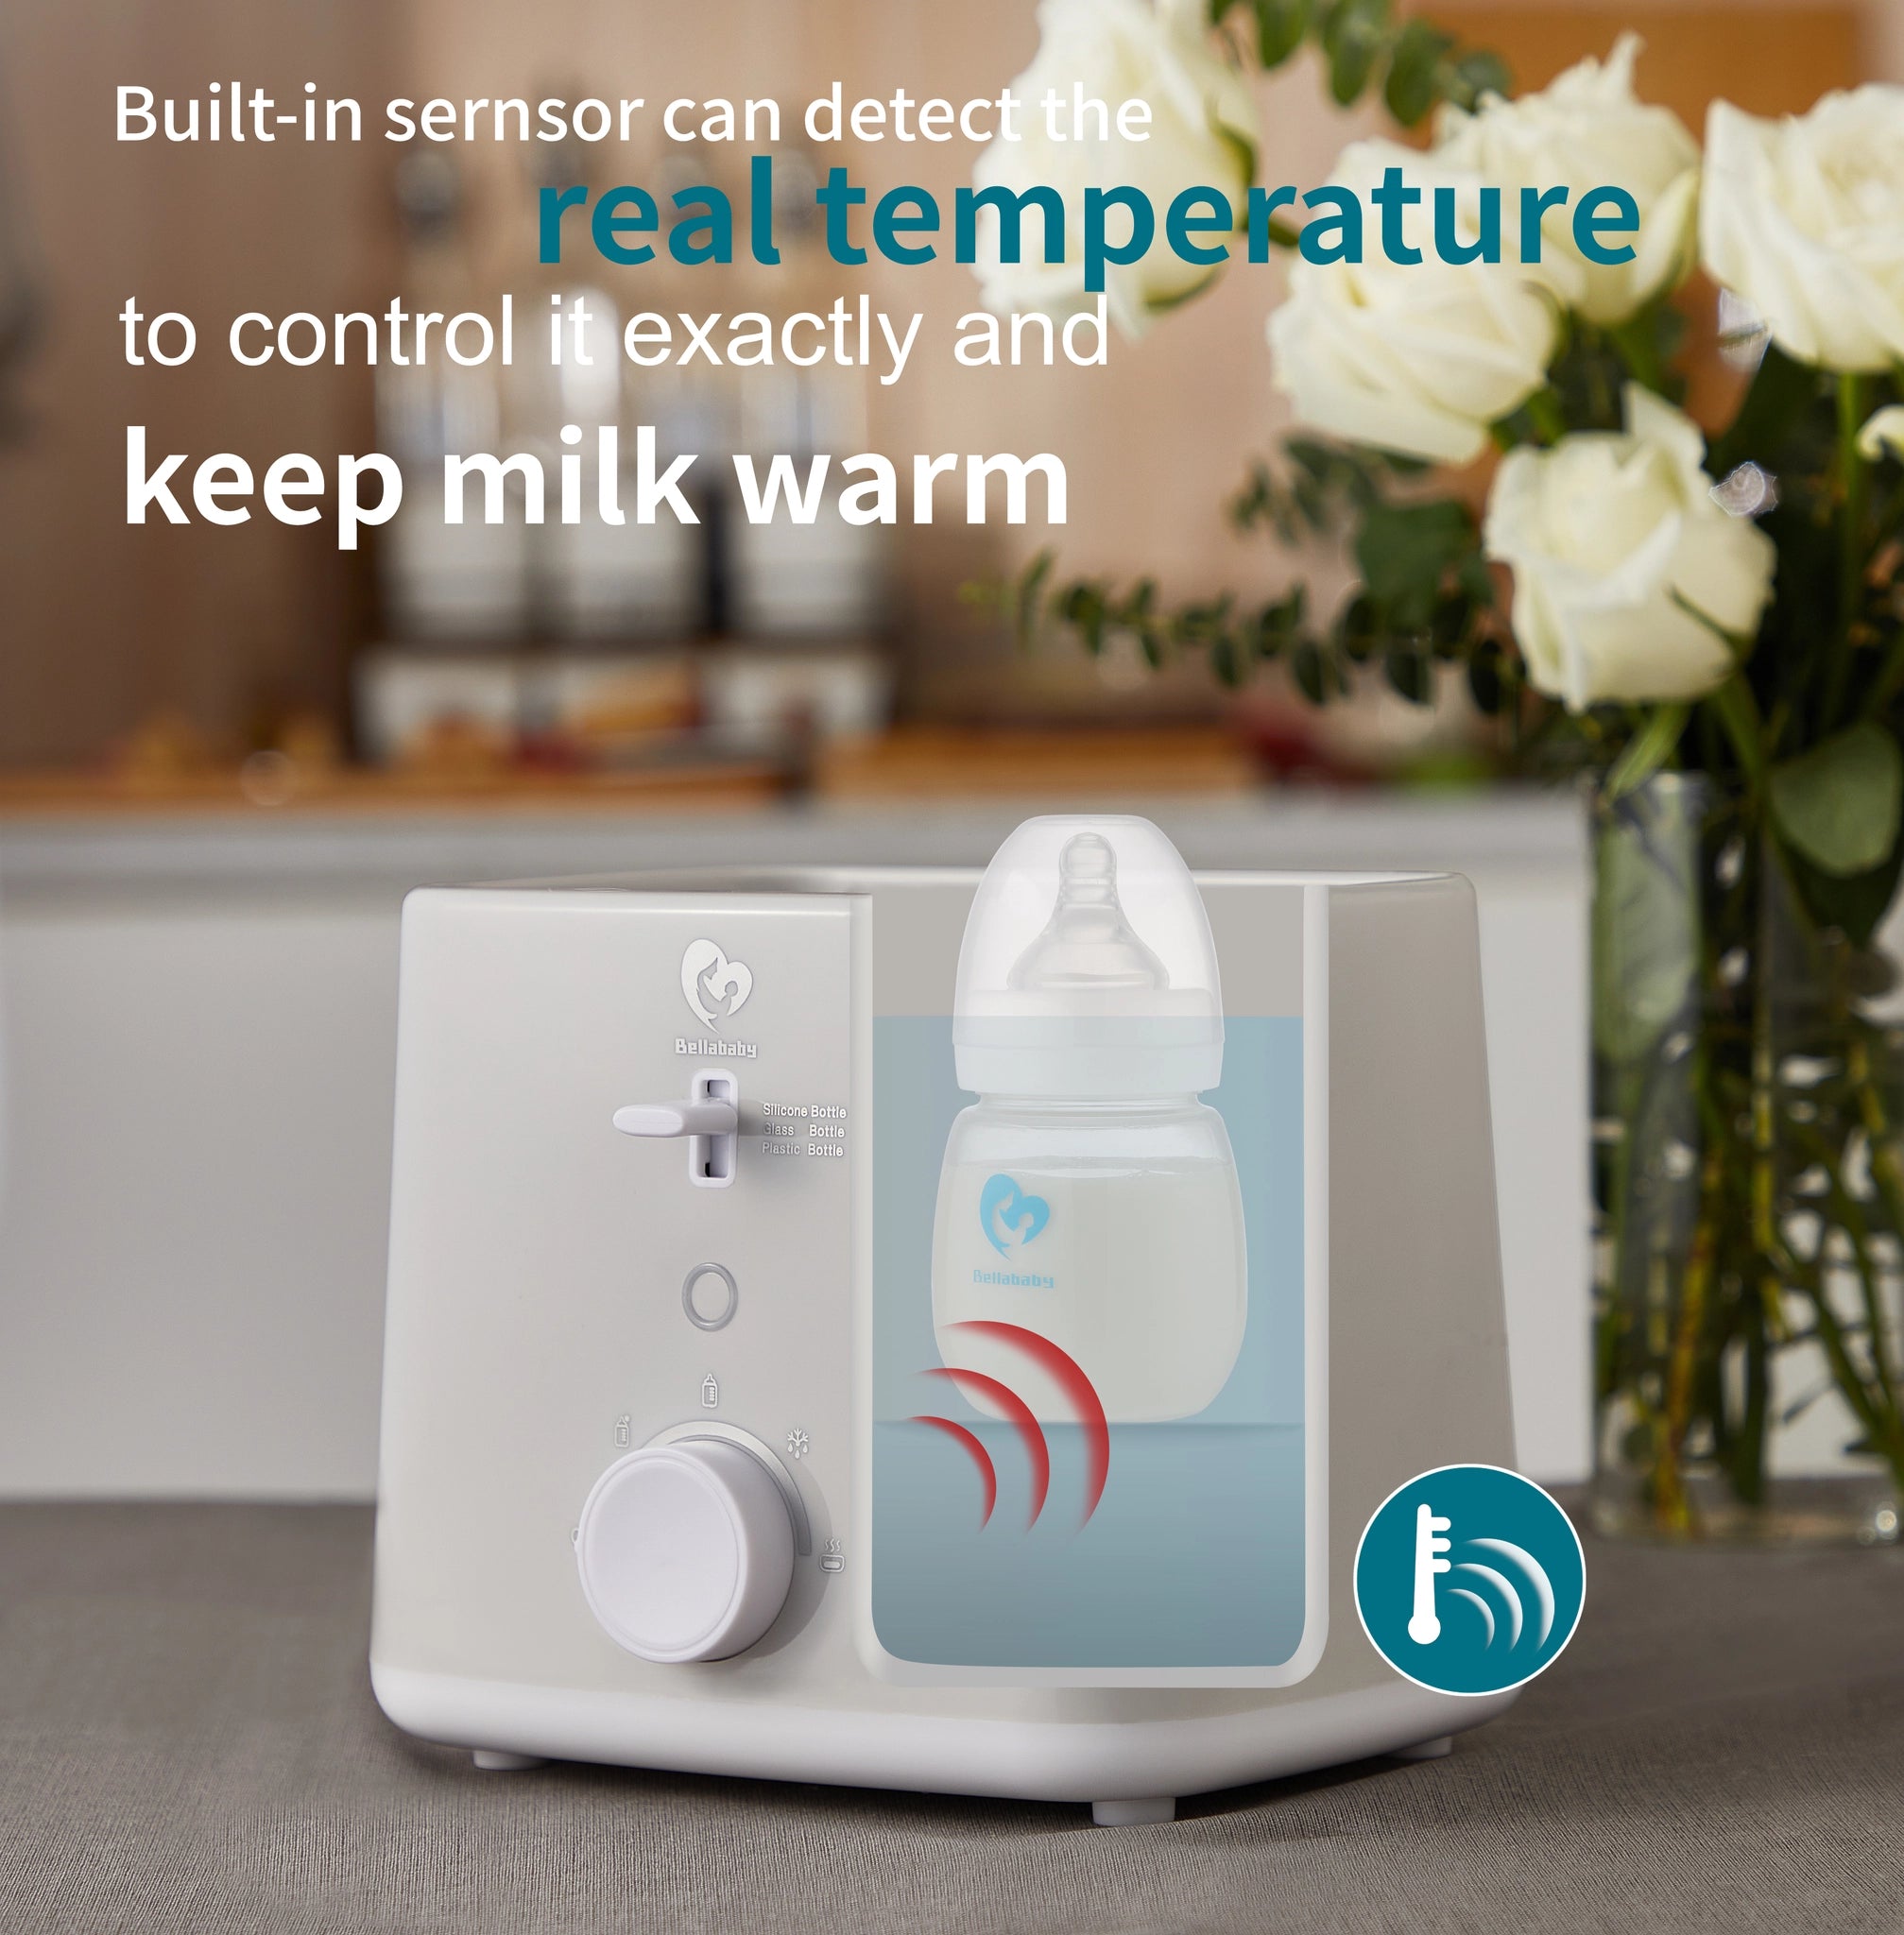 Bellababy Double Bottle Warmer - control milk exactly and keep milk warm